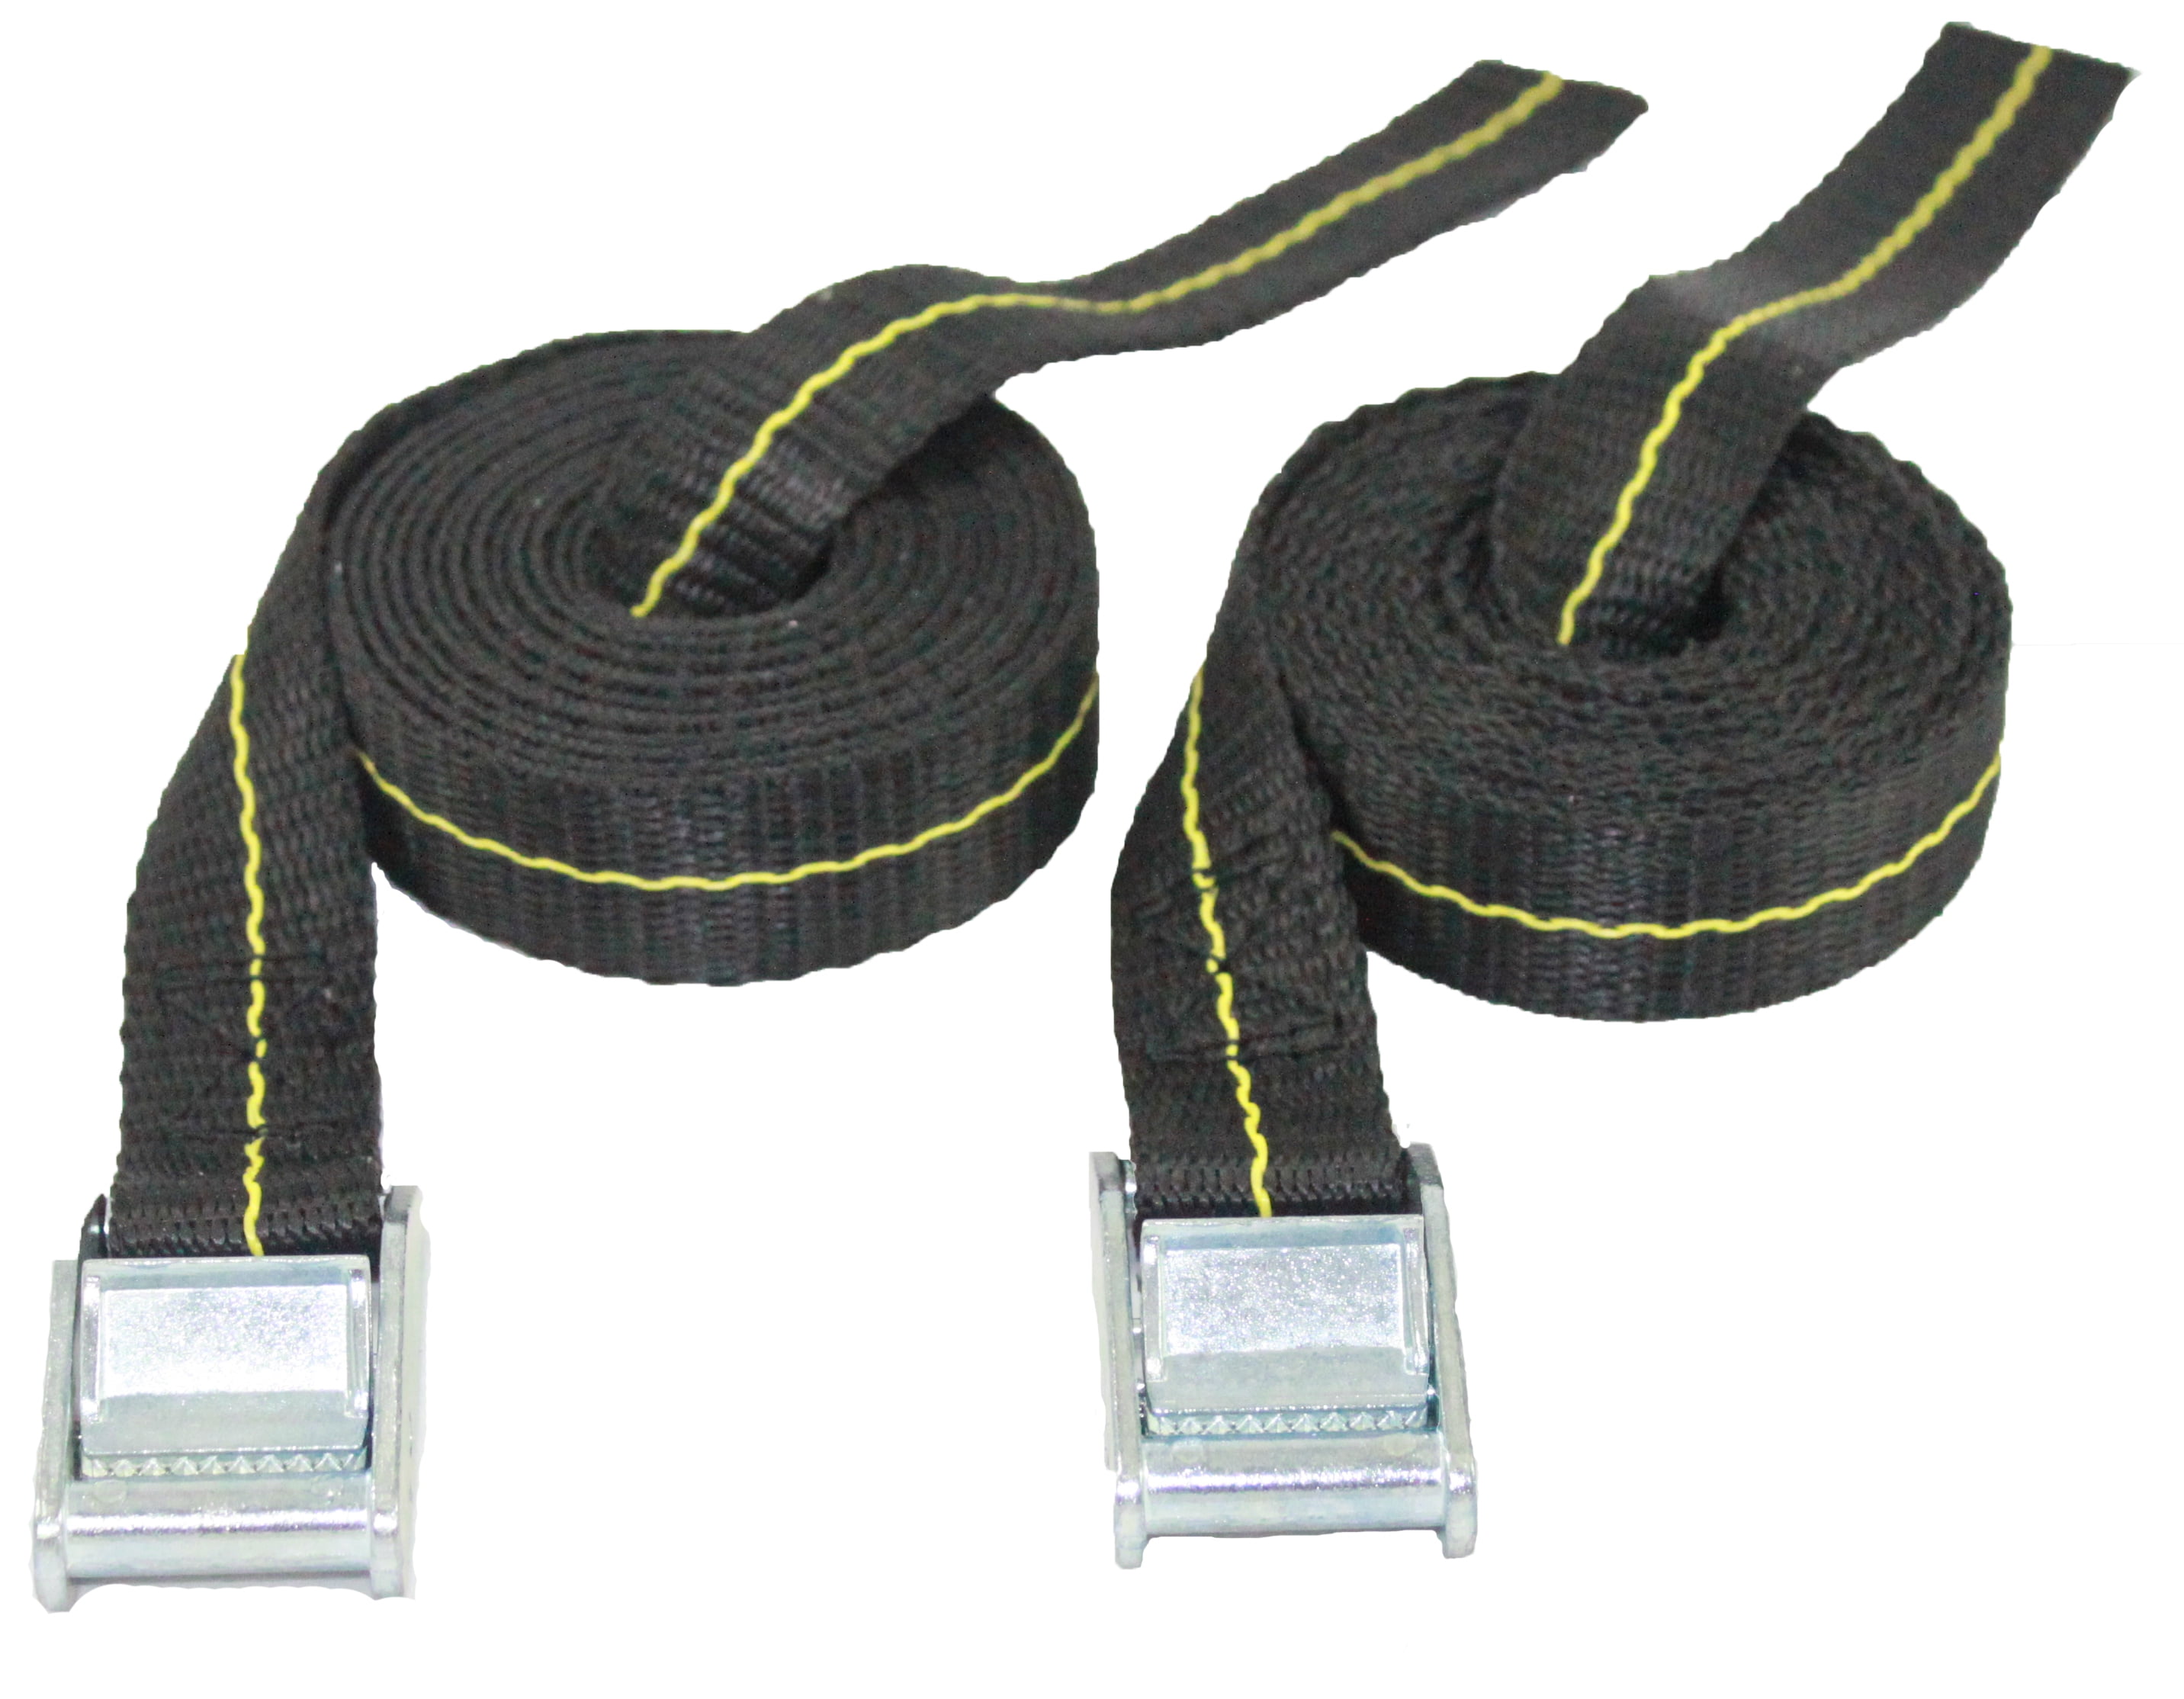 Car Roof Rack Straps for Surfboard Kayak or Cargo ... Premium Tie Down Straps 